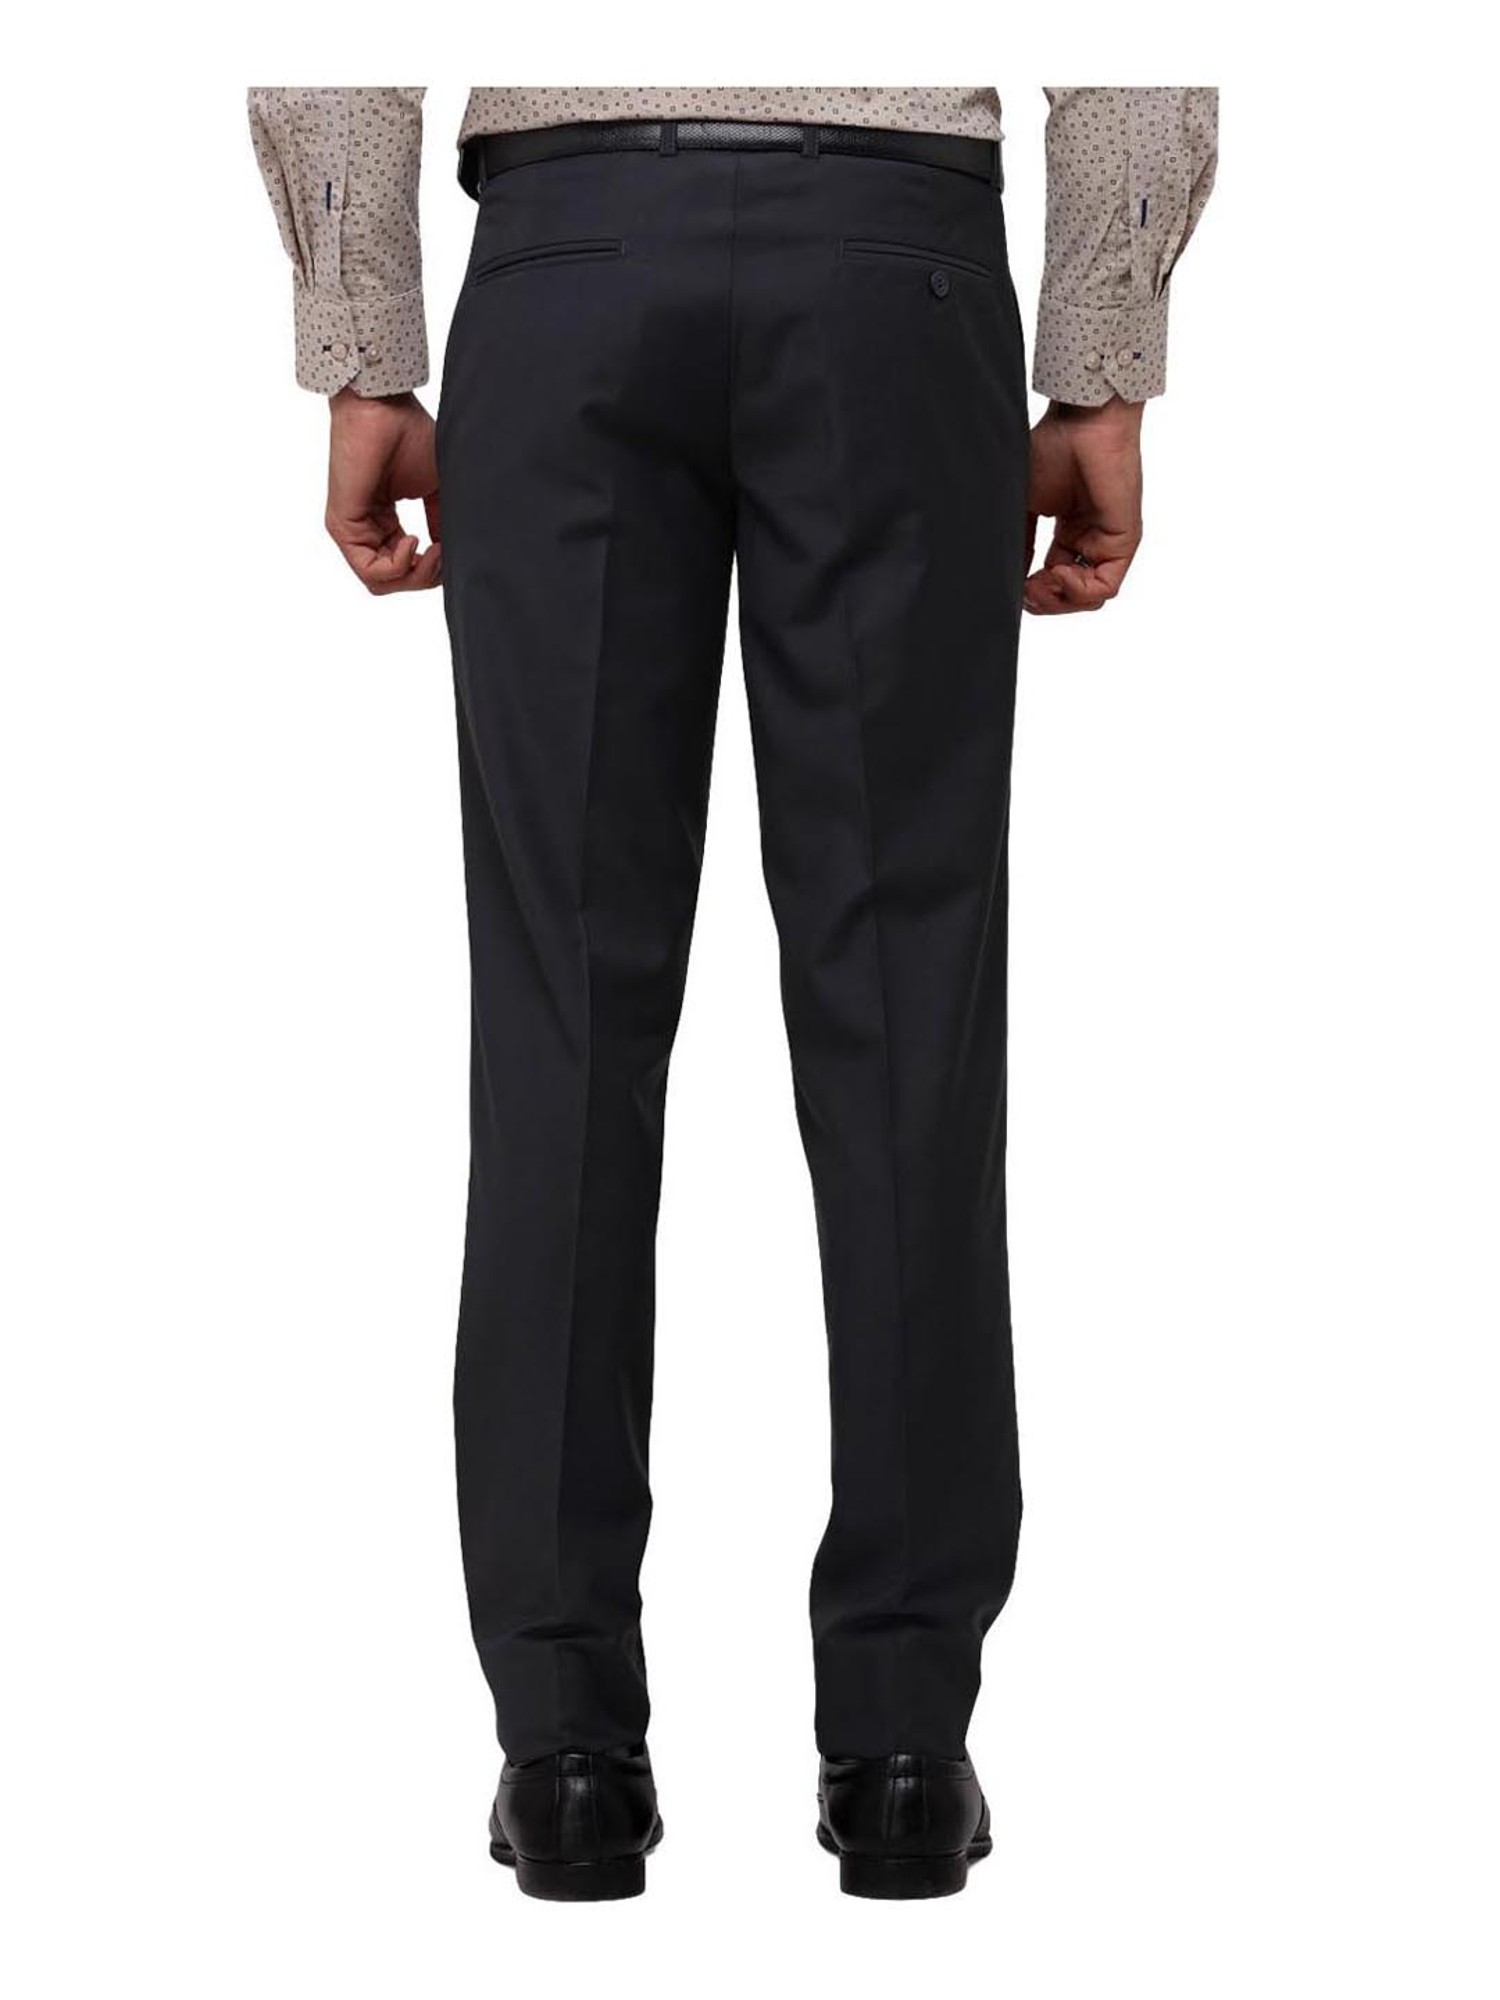 BUY BASICS GREY SATIN WEAVE POLY COTTON TROUSERS ONLINE